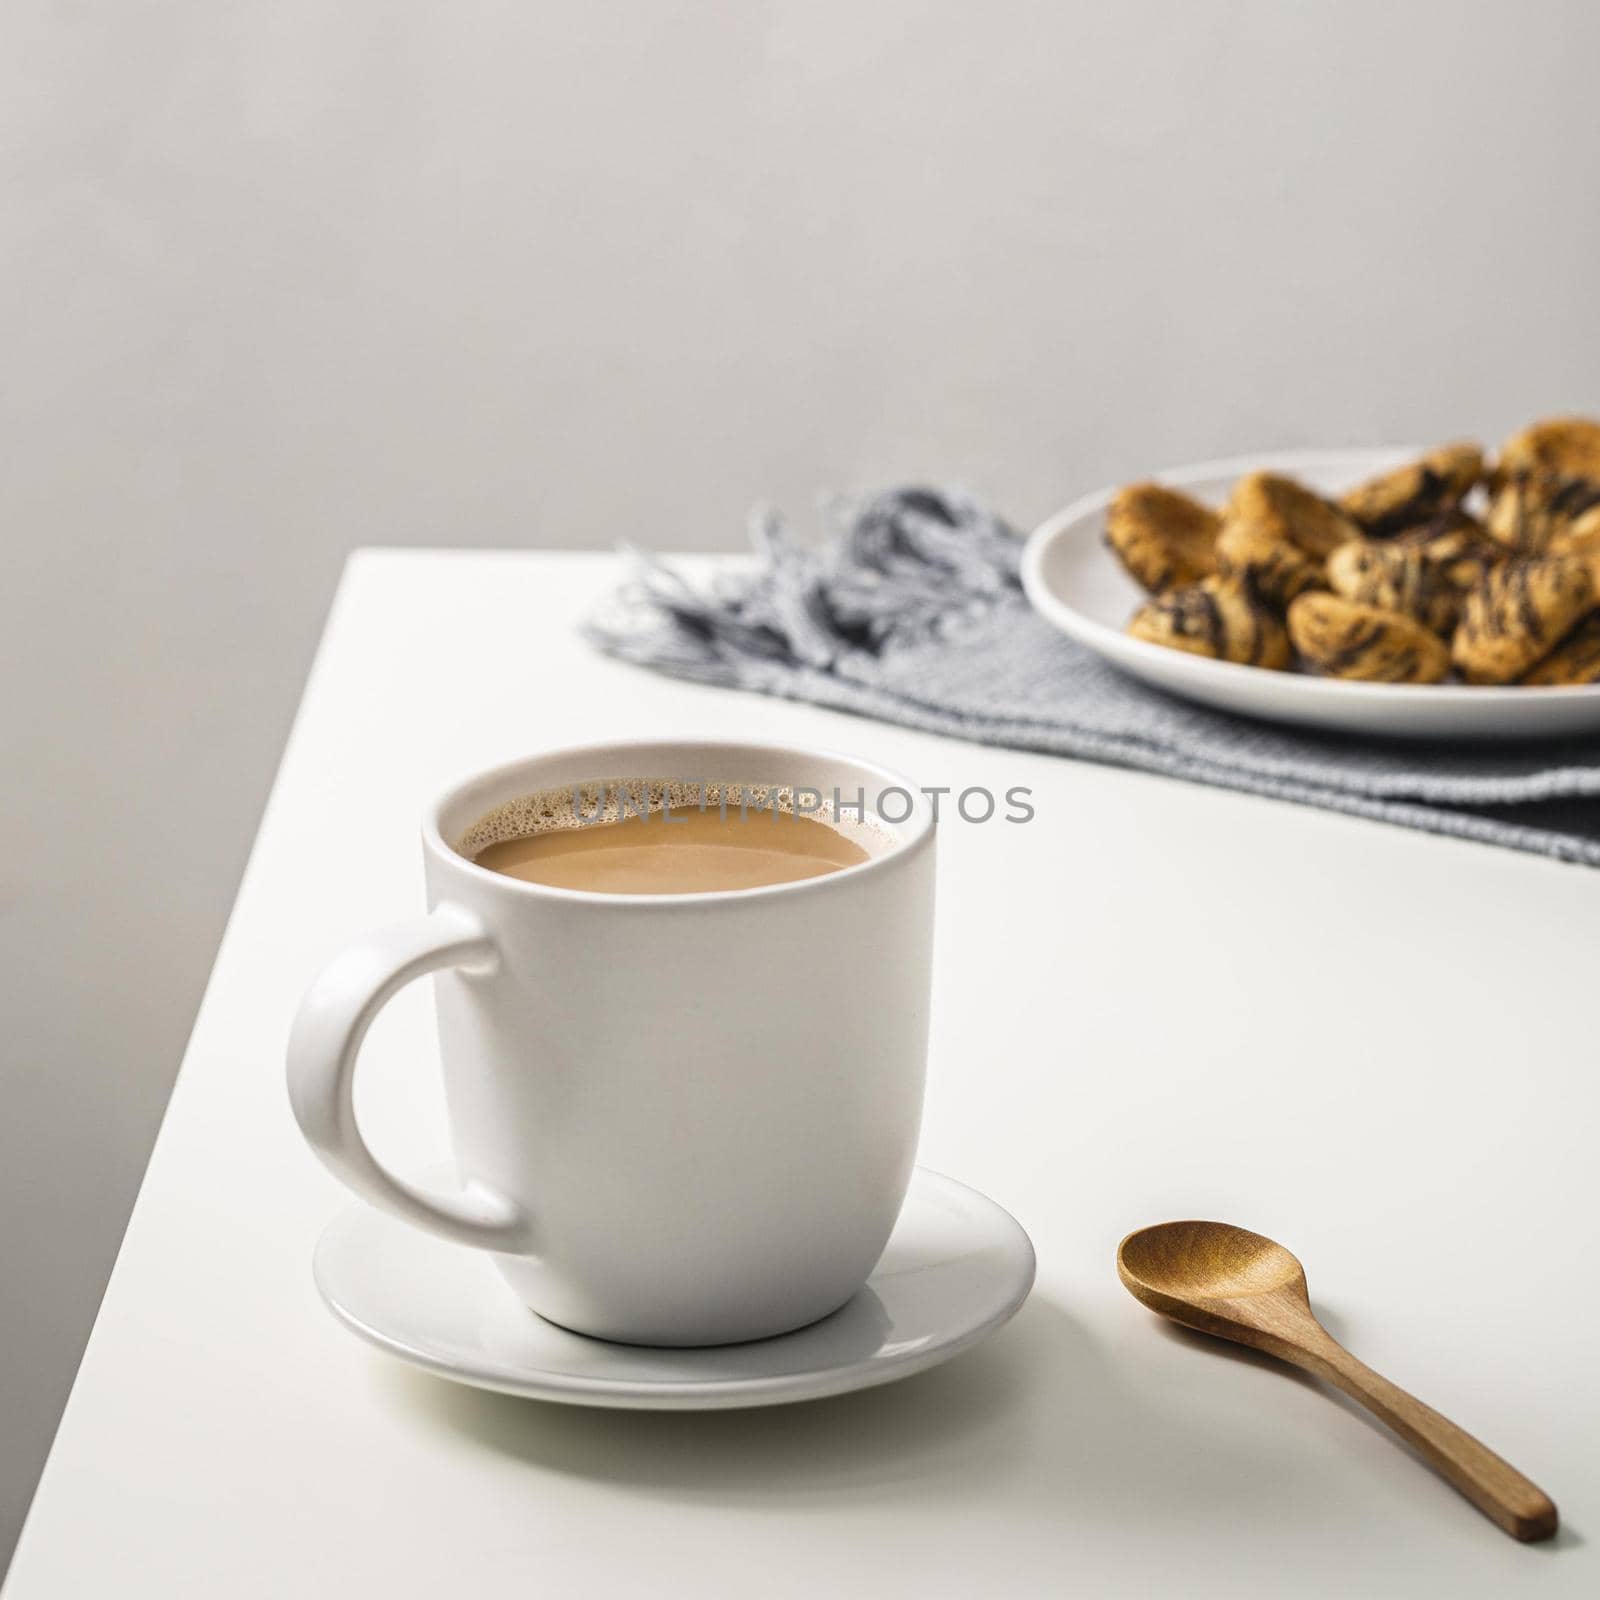 coffee mug table with cookies plate spoon. Resolution and high quality beautiful photo